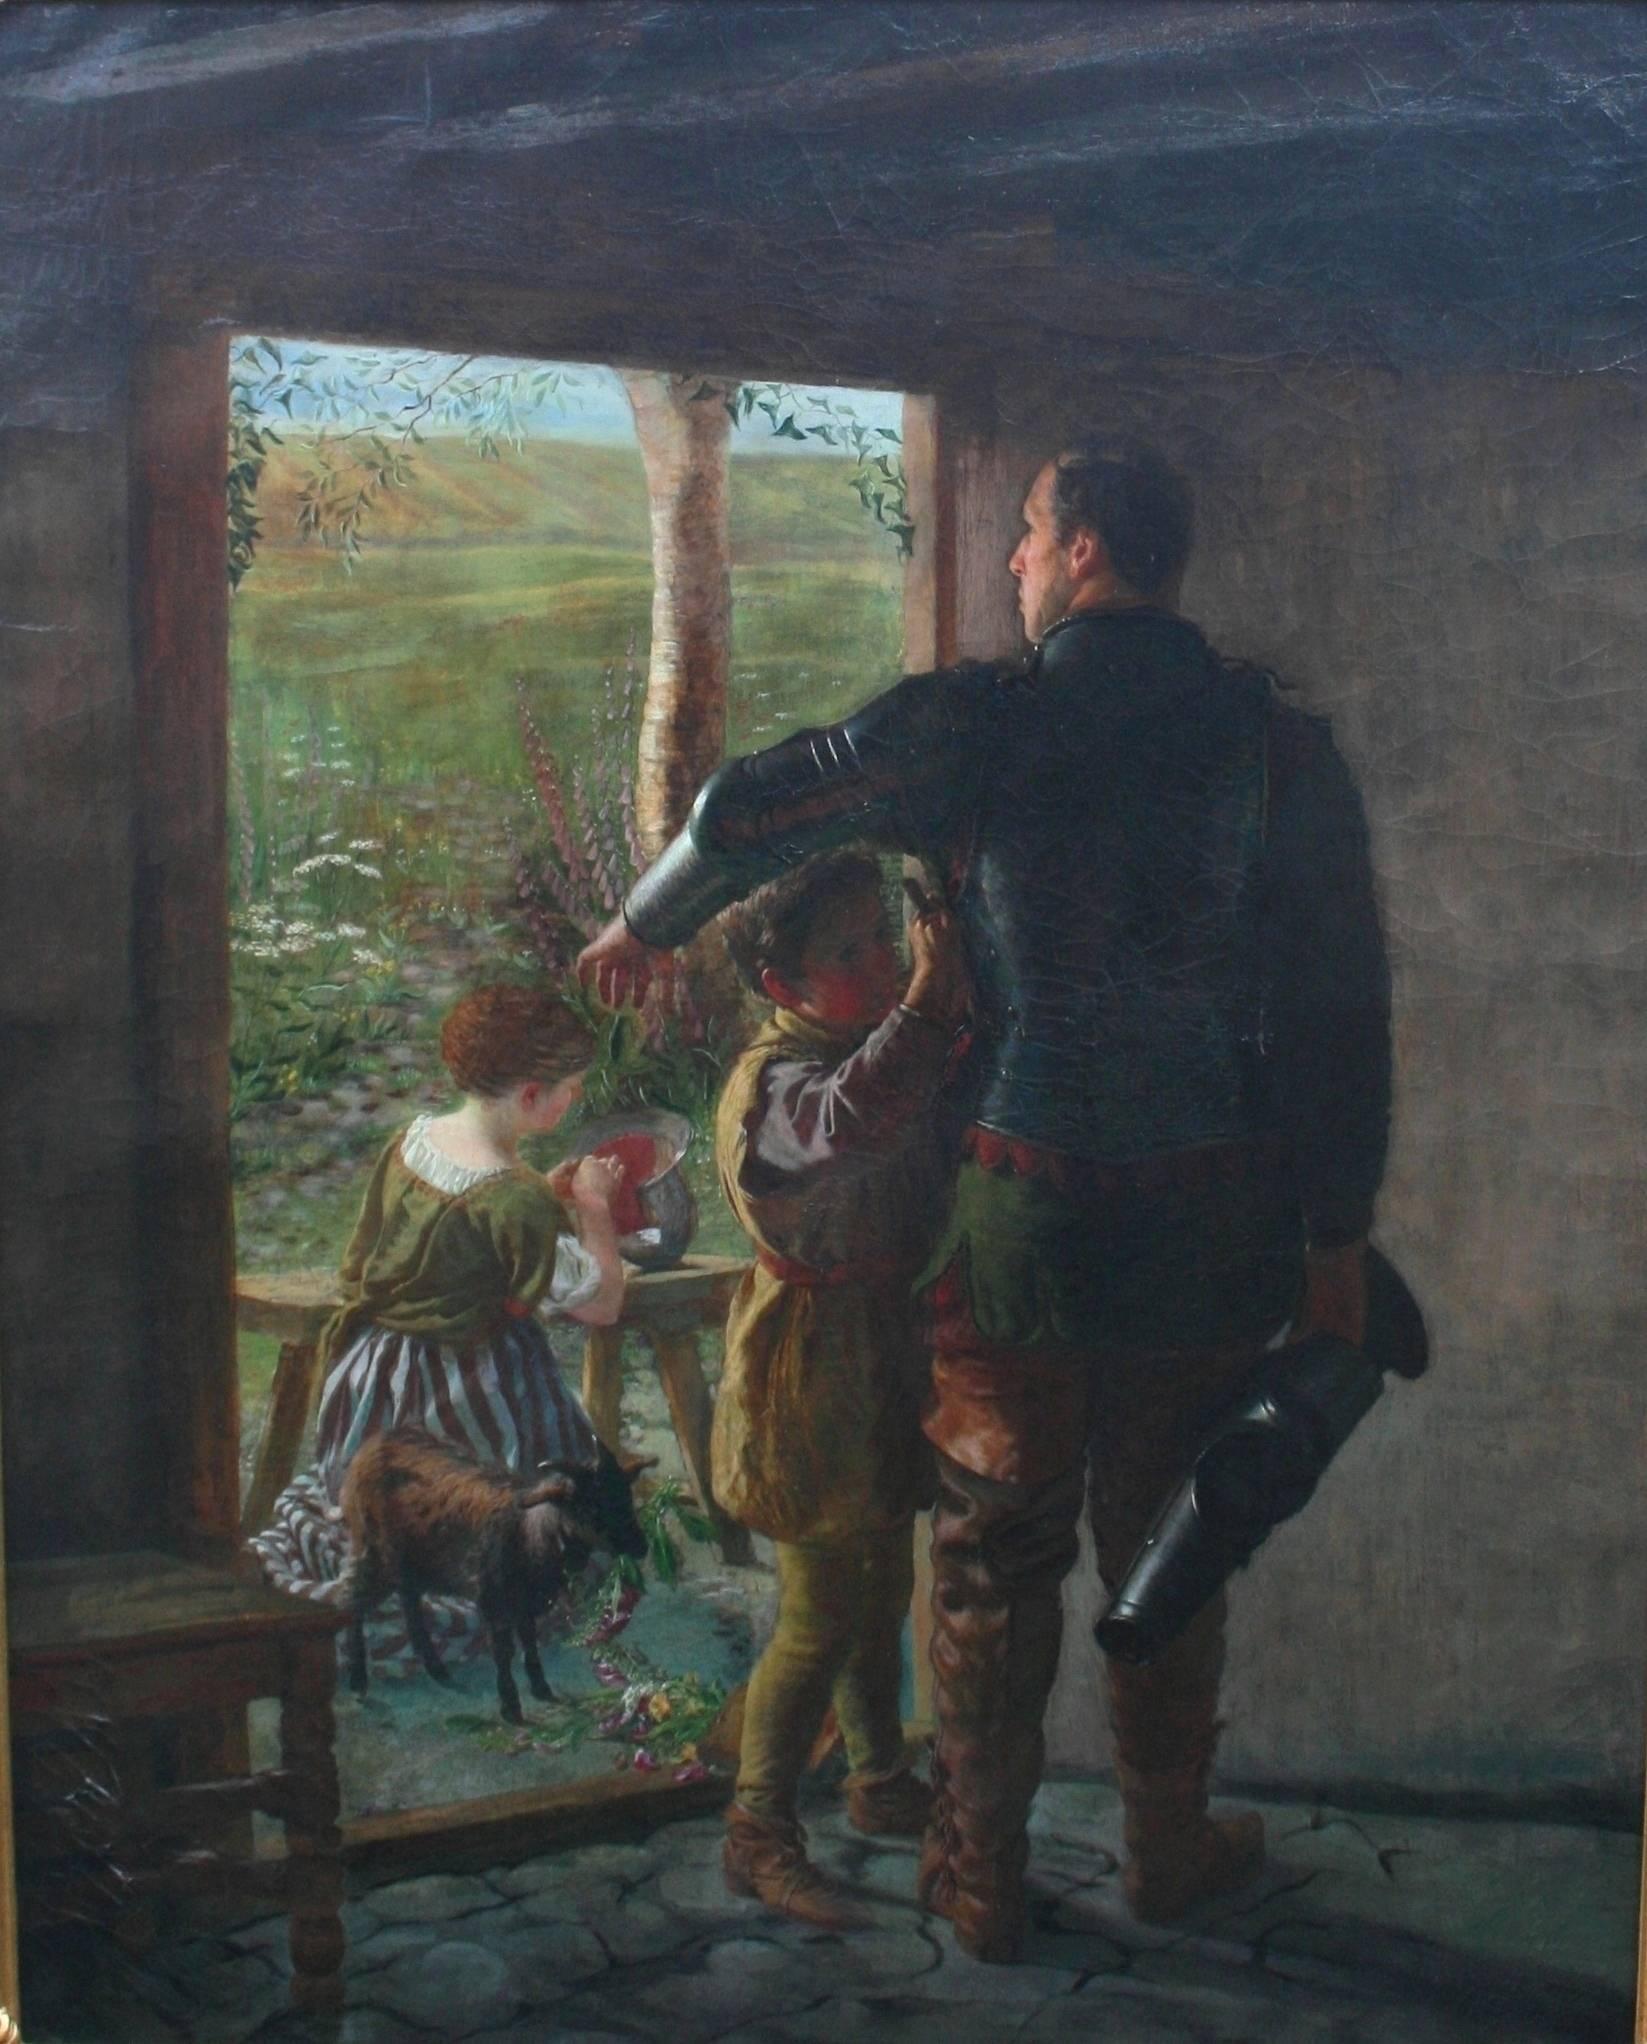  
Title	
'A Call to Duty'

Medium	
Oil on canvas

Frame	
127 x 149 cm / 50 x 58 1/2 in

Period	
Pre Raphaelite, 19th c.

Signed
Unsigned

Frame	
Set in heavy commensurate gilt frame

Condition	
Good commensurate with age. Craquelure to the surface.